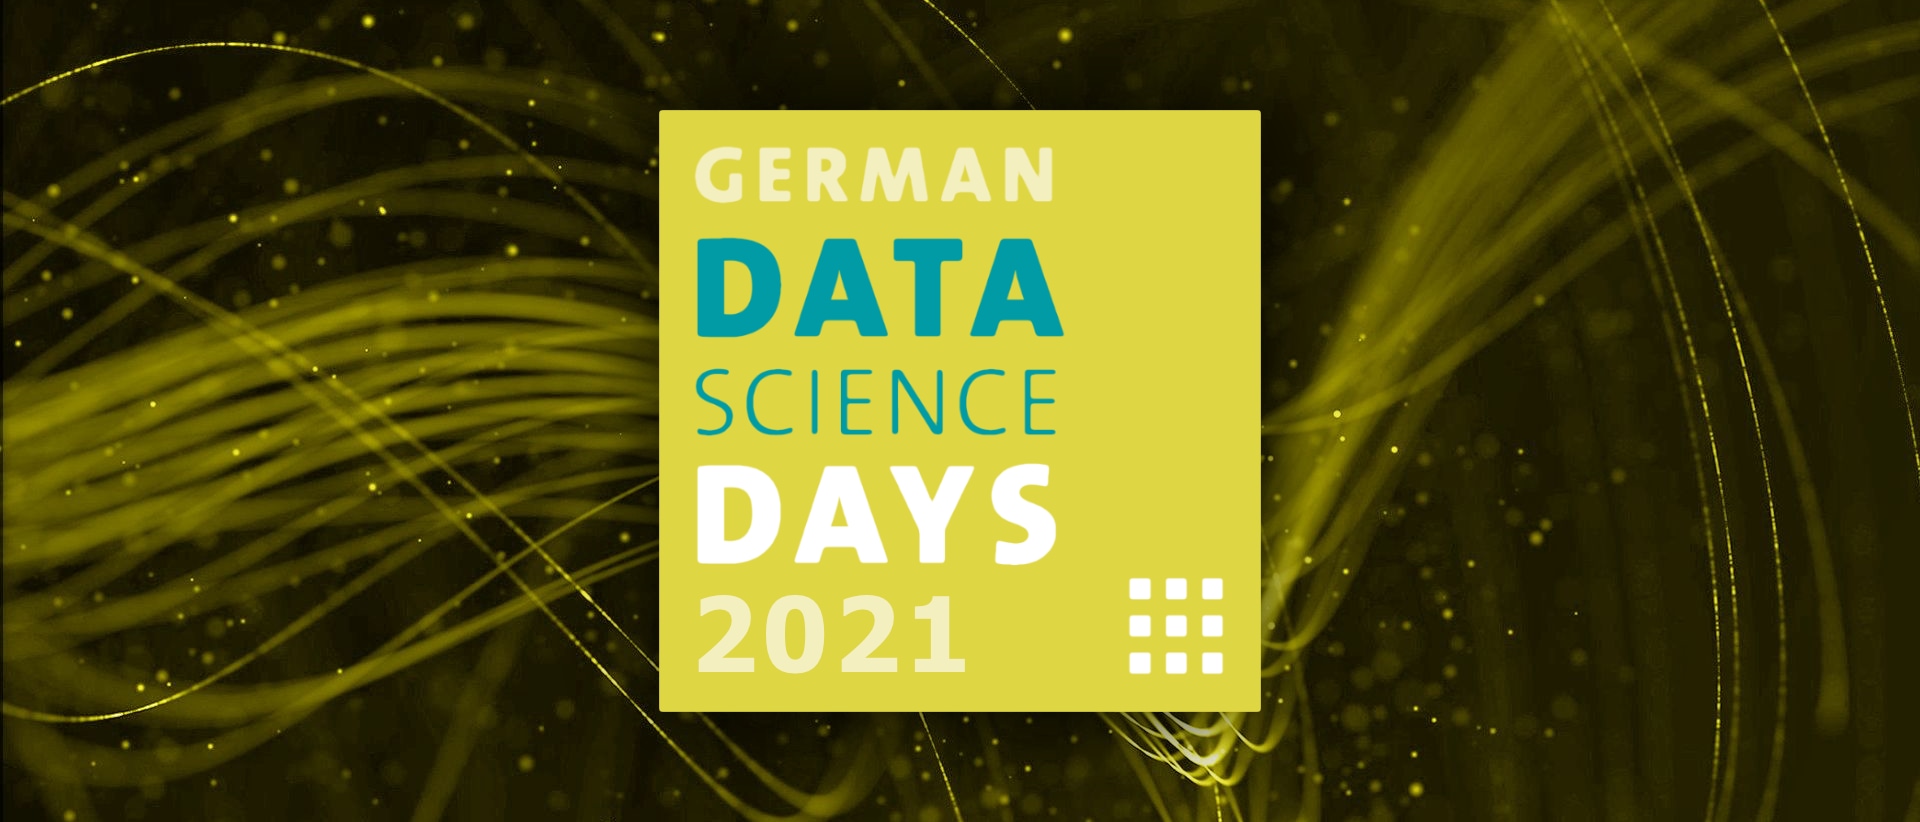 Abstract wave with German Data Science Days logo